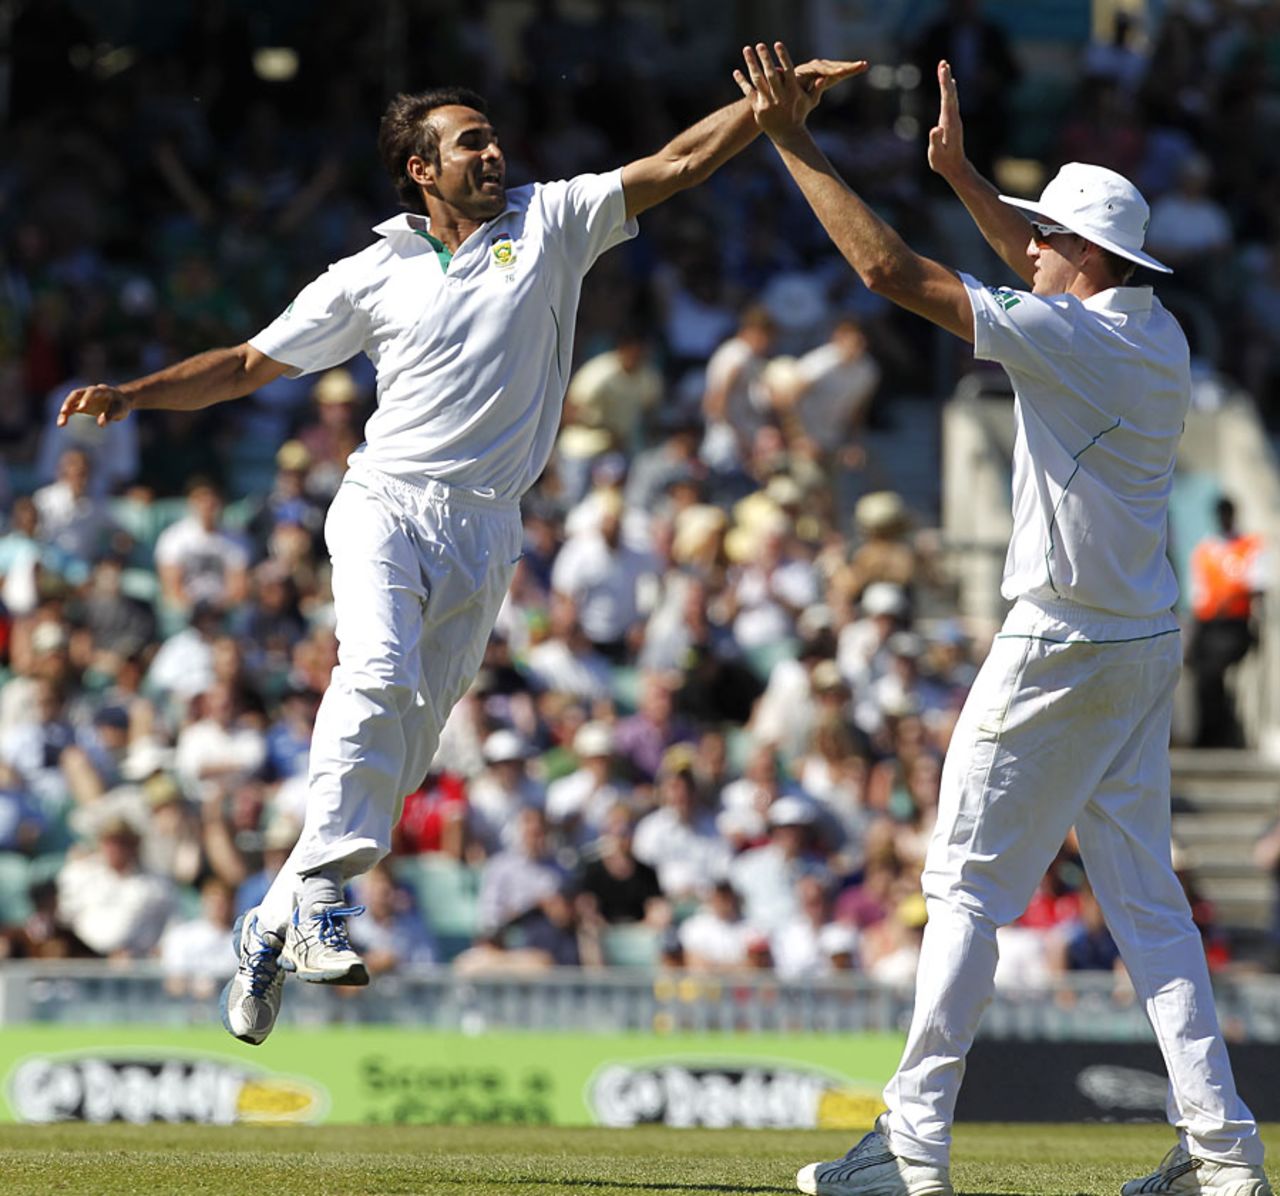 Another leap of celebration from Imran Tahir, England v South Africa, 1st Test, The Oval, 5th day, July 23, 2012